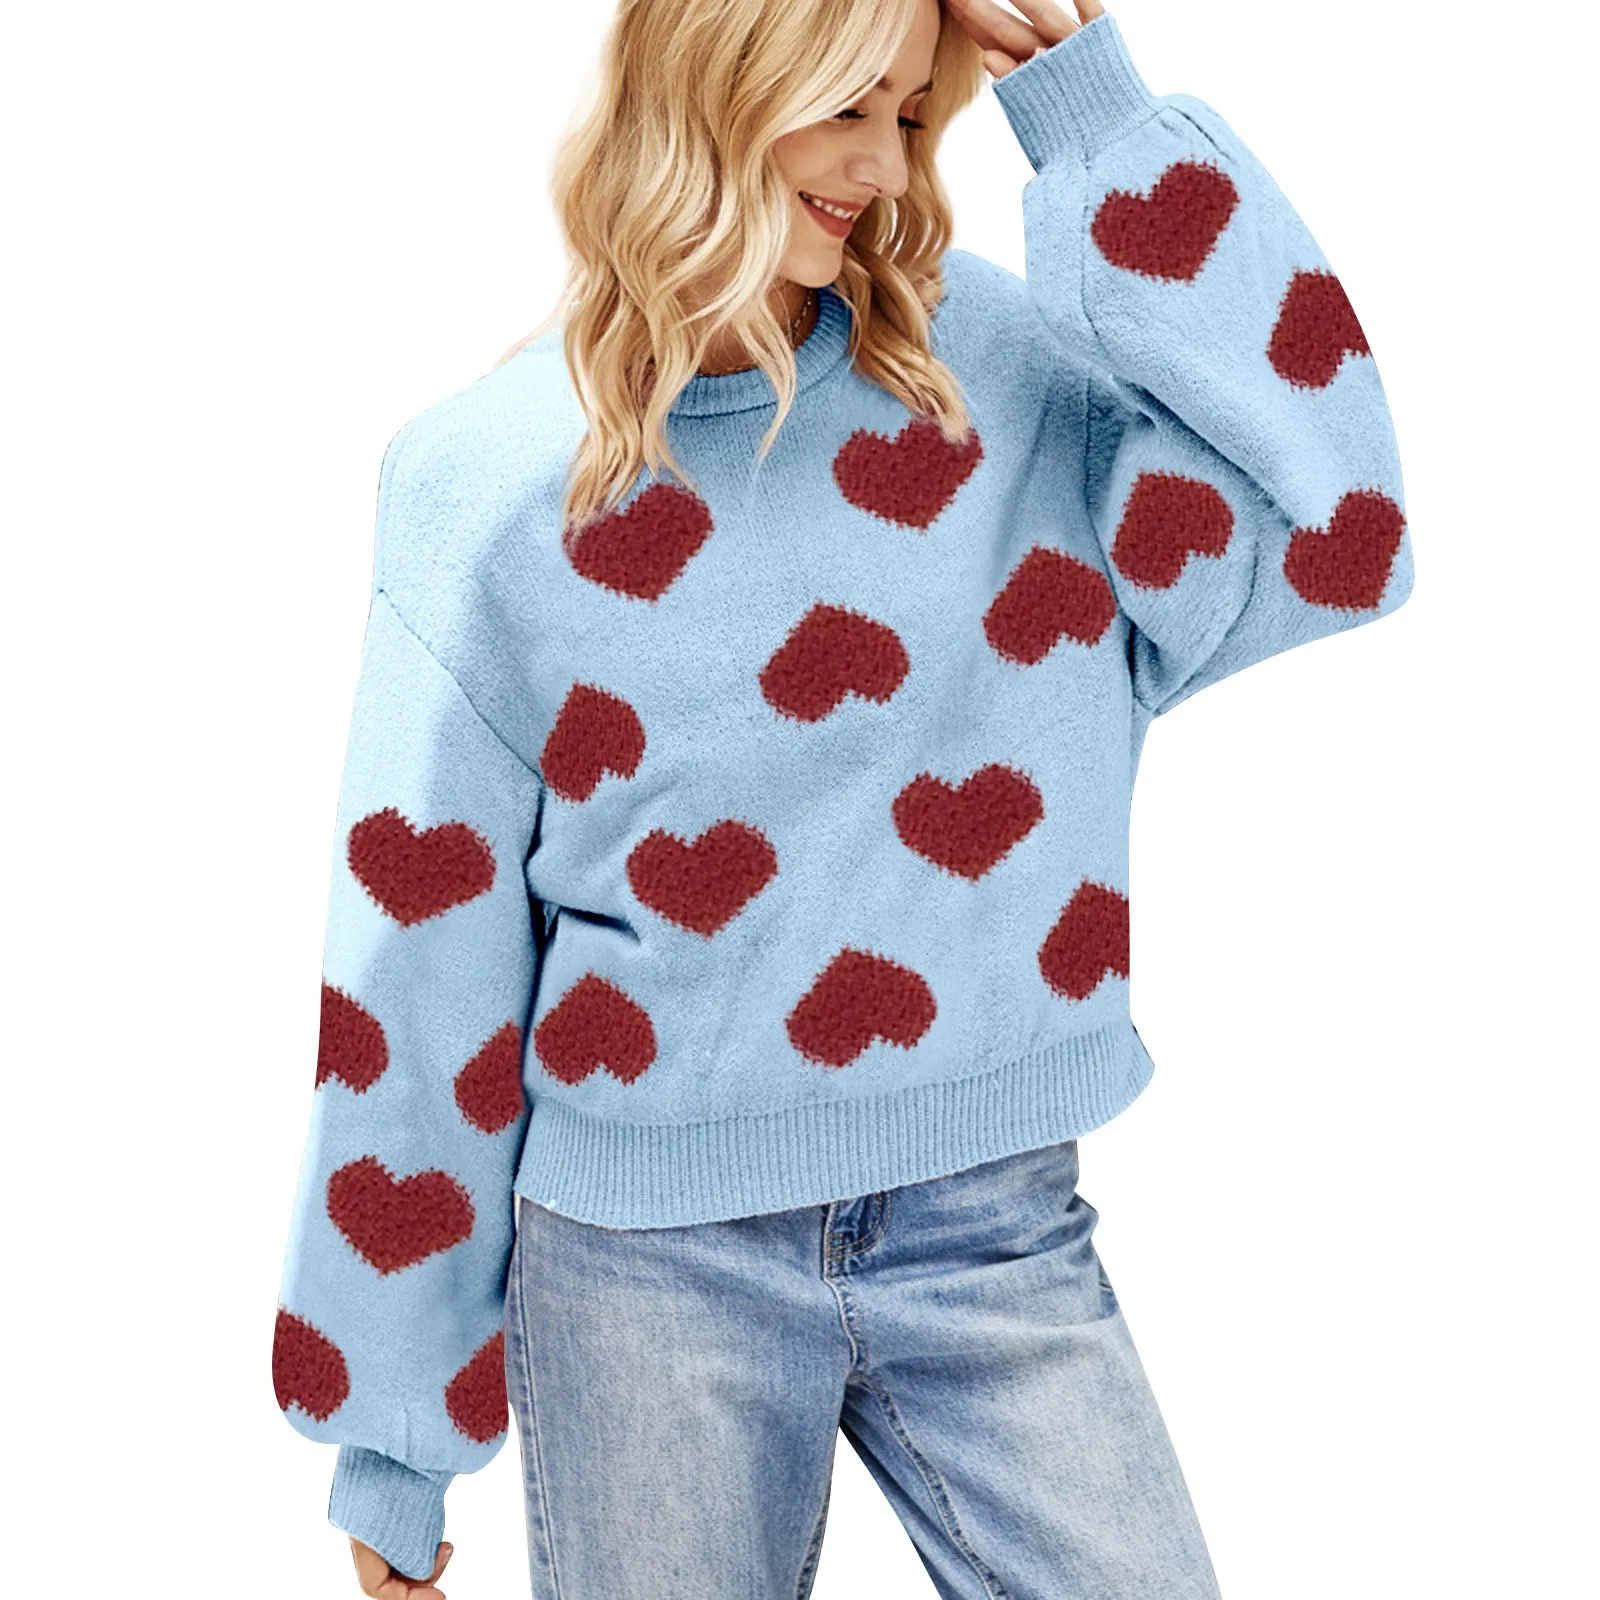 

Women'S Knitwear Valentine'S Day Cute Love Print Knit Sweater Soft Smooth Tunic Pullover Tops Female Jumper Blue Long Sleeve